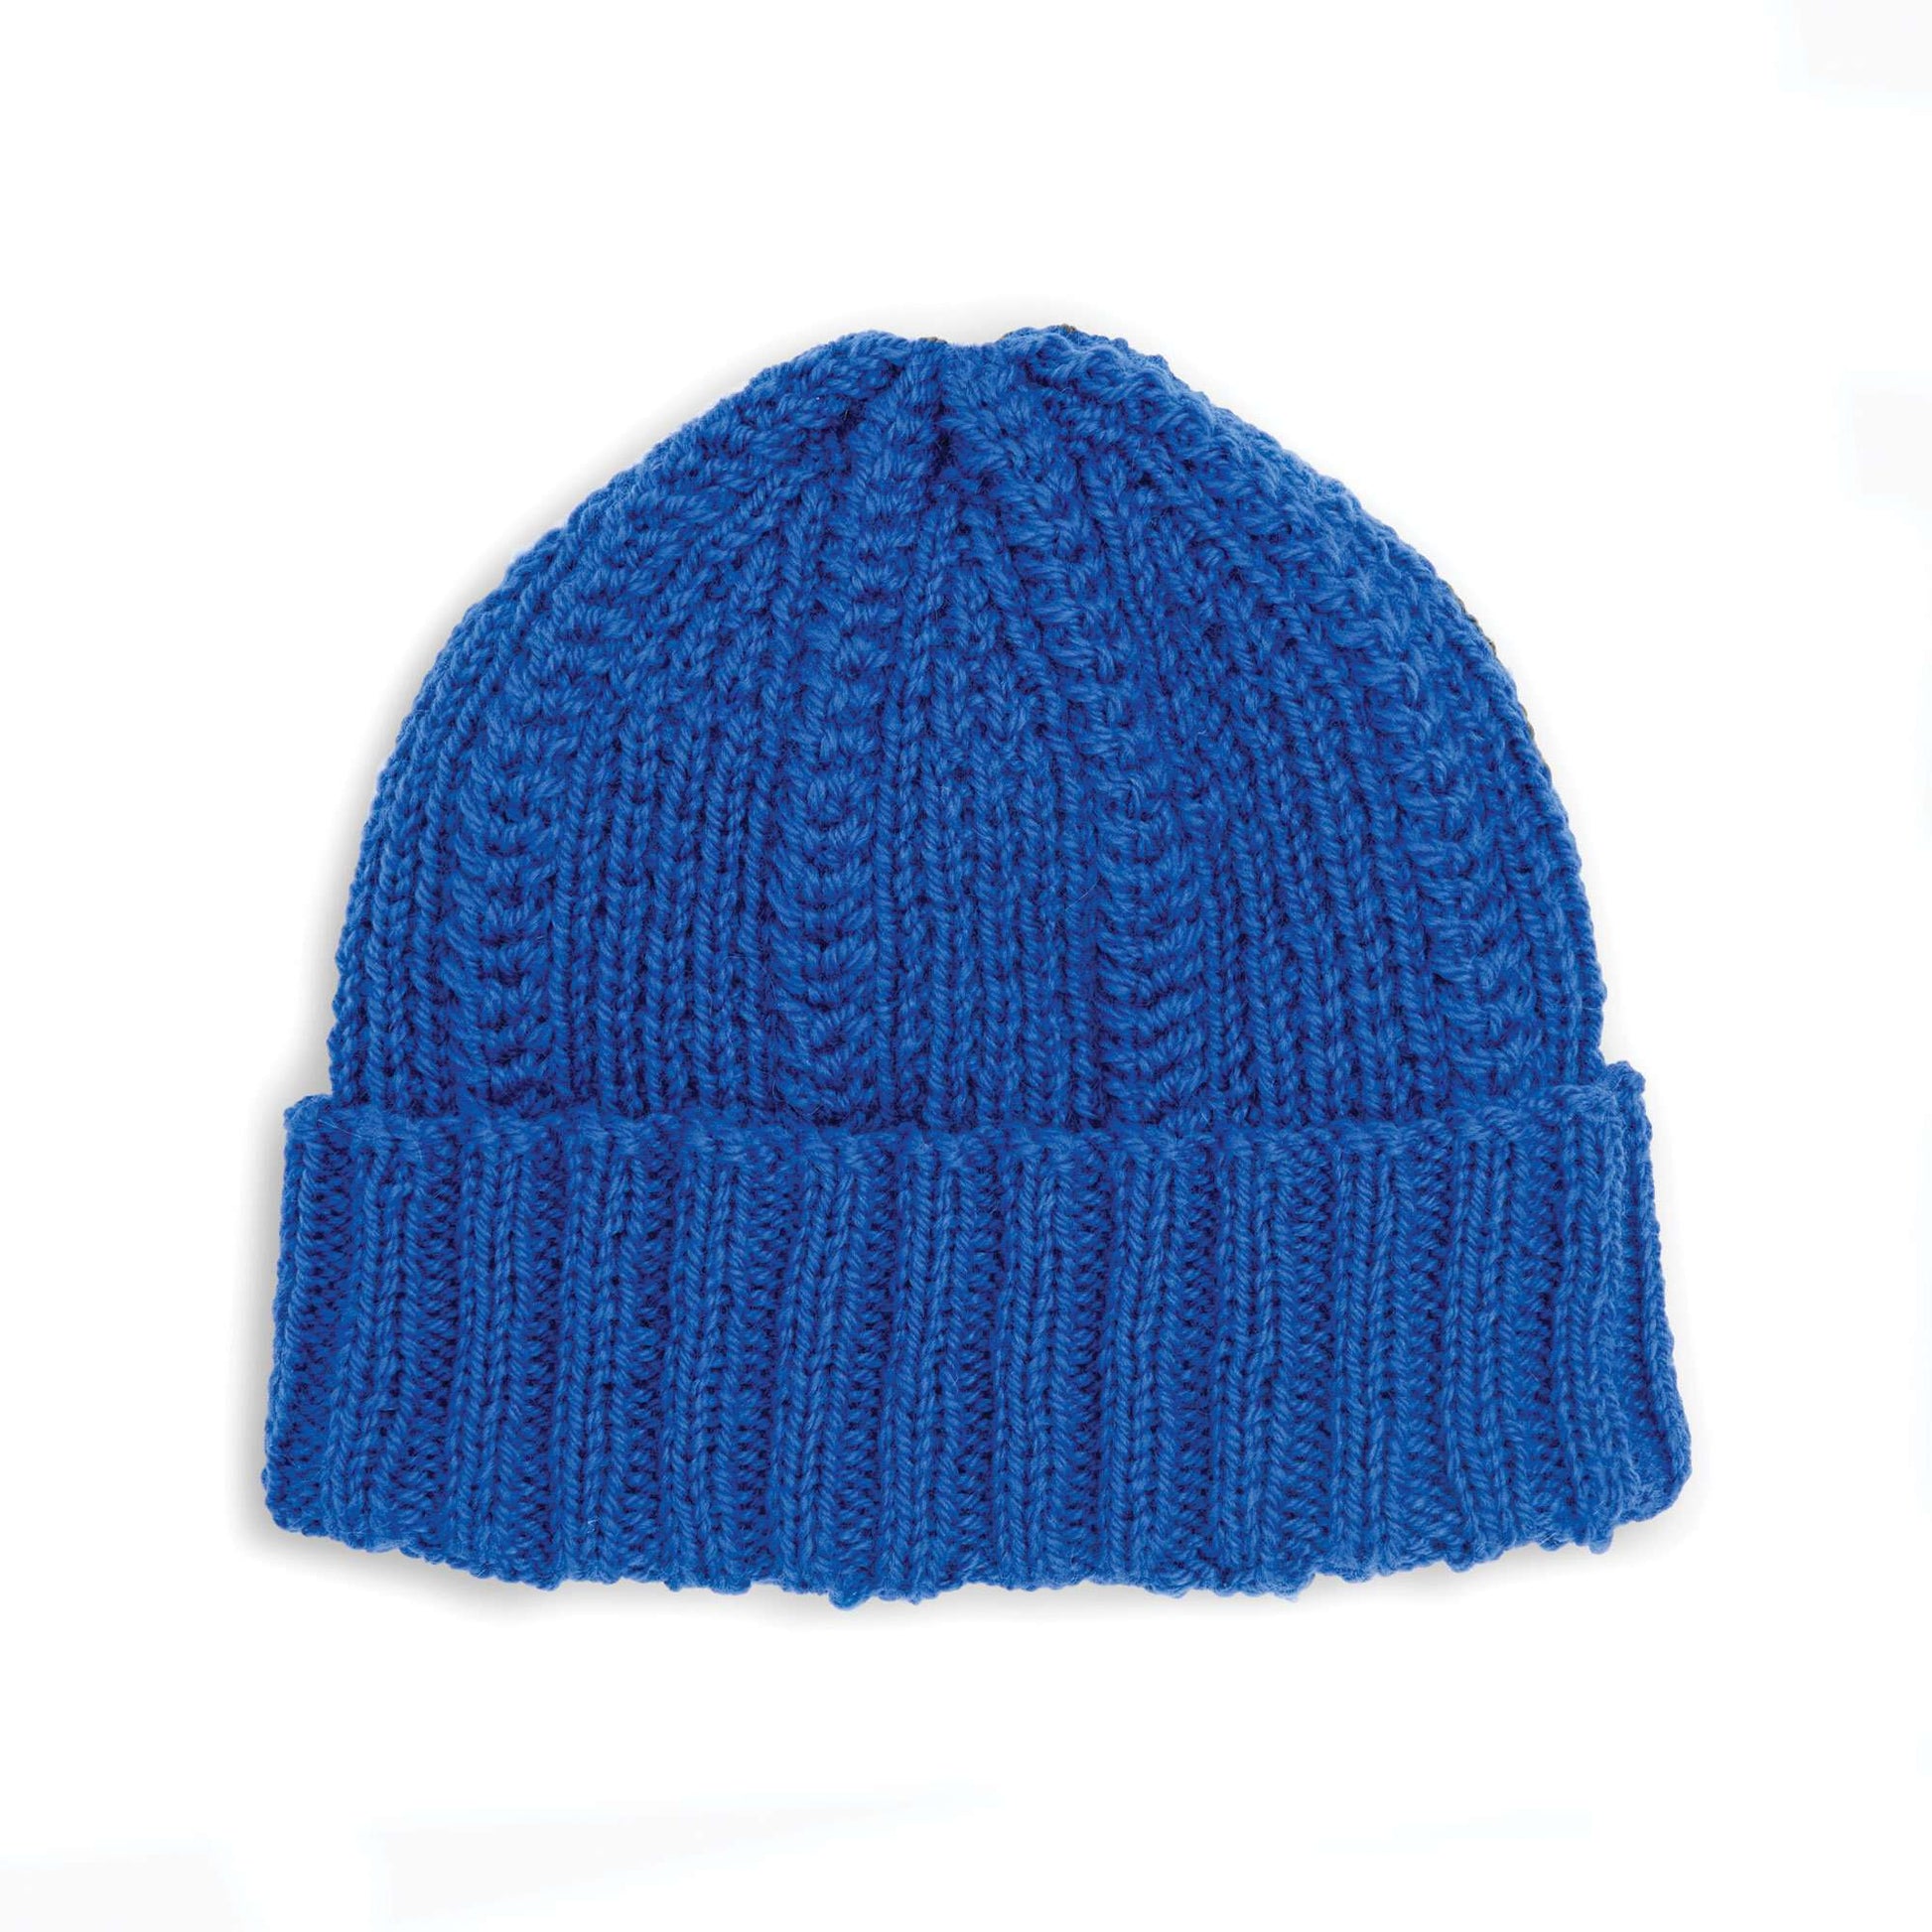 Free Patons Cable And Rib Knit Hat Pattern